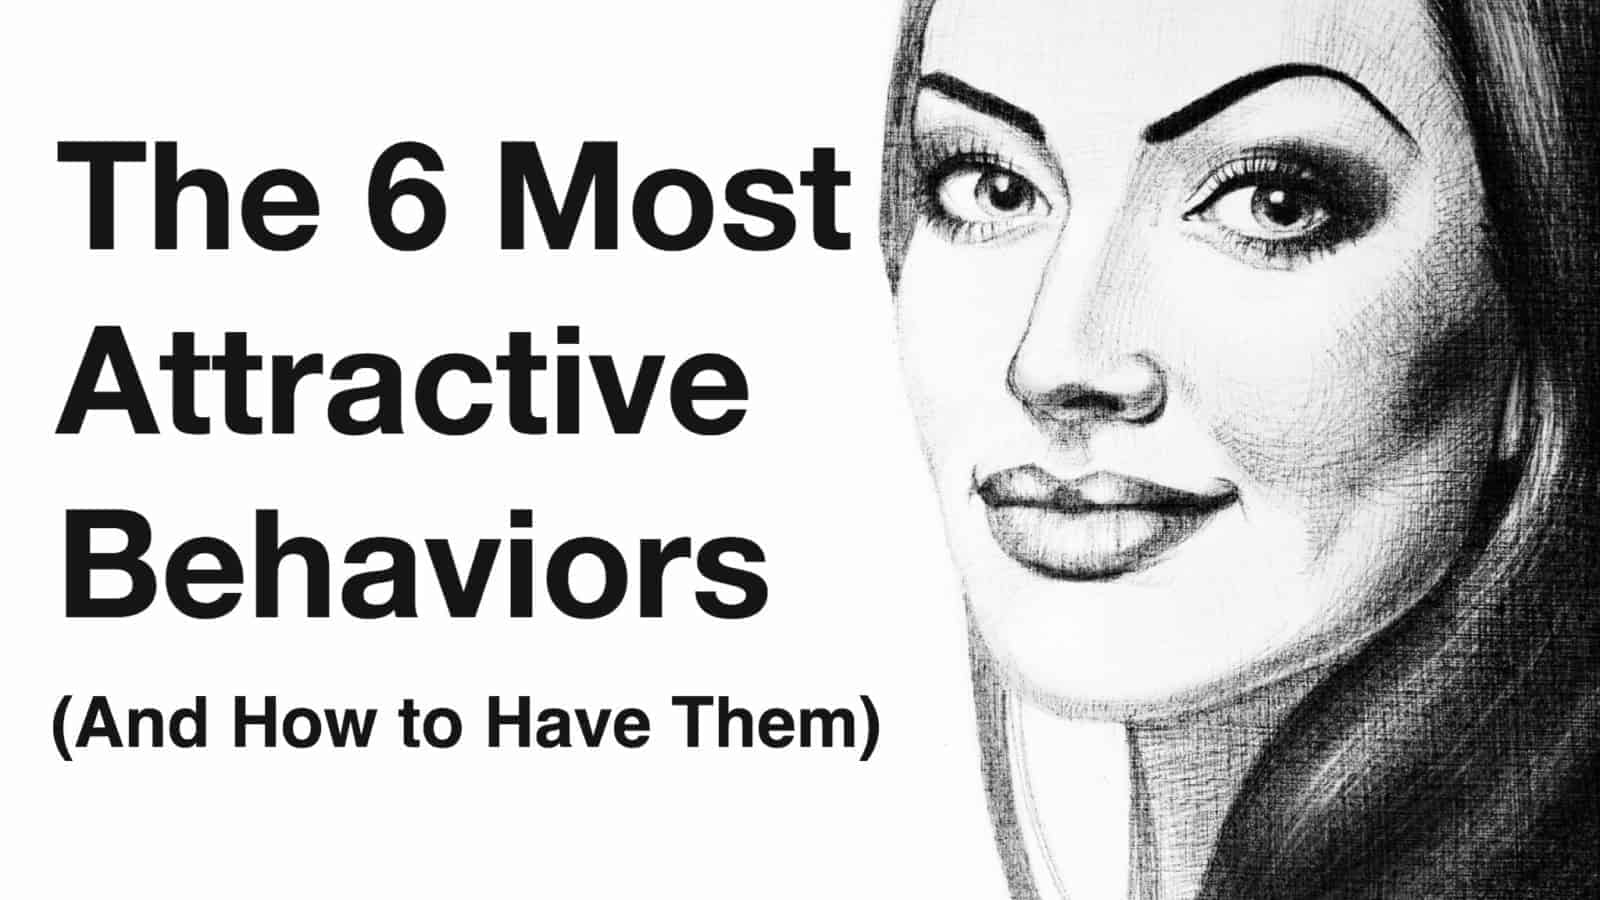 The 6 Most Attractive Behaviors (And How to Have Them)